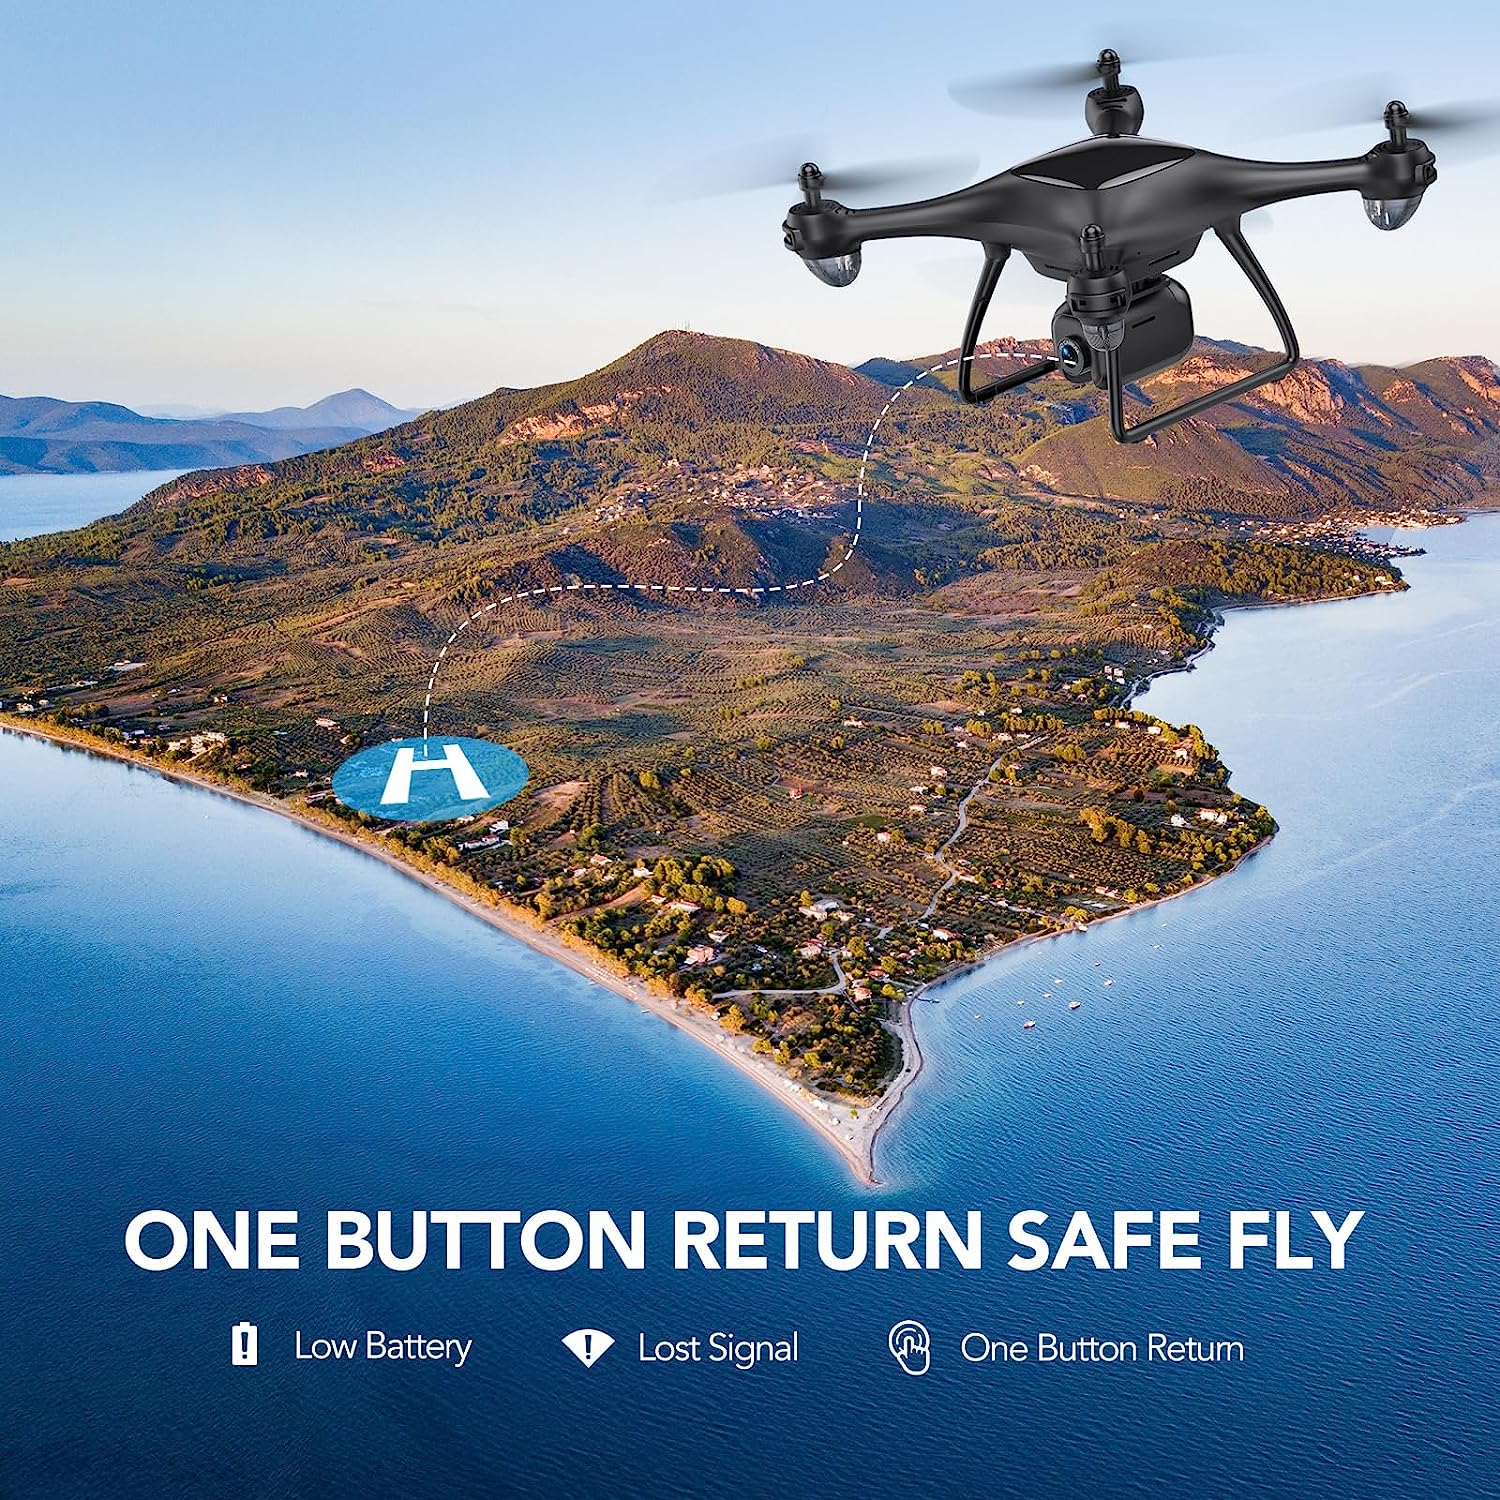 TOMZON P5G Drones with Camera for Adults 4K, FPV GPS Camera Drone 5G WiFi Transmission for Beginner, Auto Return Home, Follow Me, Custom Flight Route, Under 249g, 36 Mins Long Flight with Carrying Bag